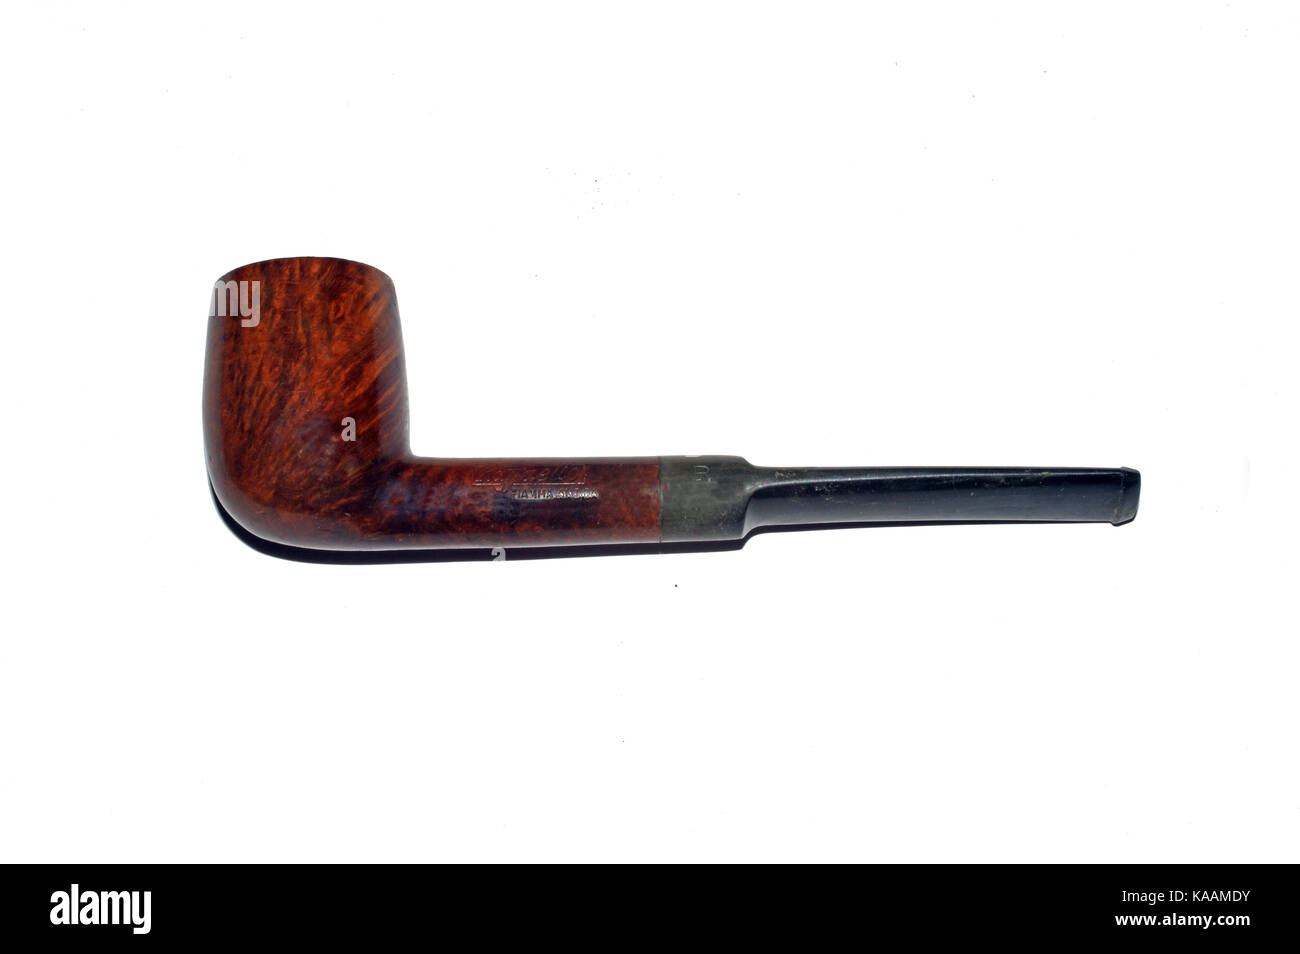 Tobacco pipe close-up on white background Stock Photo